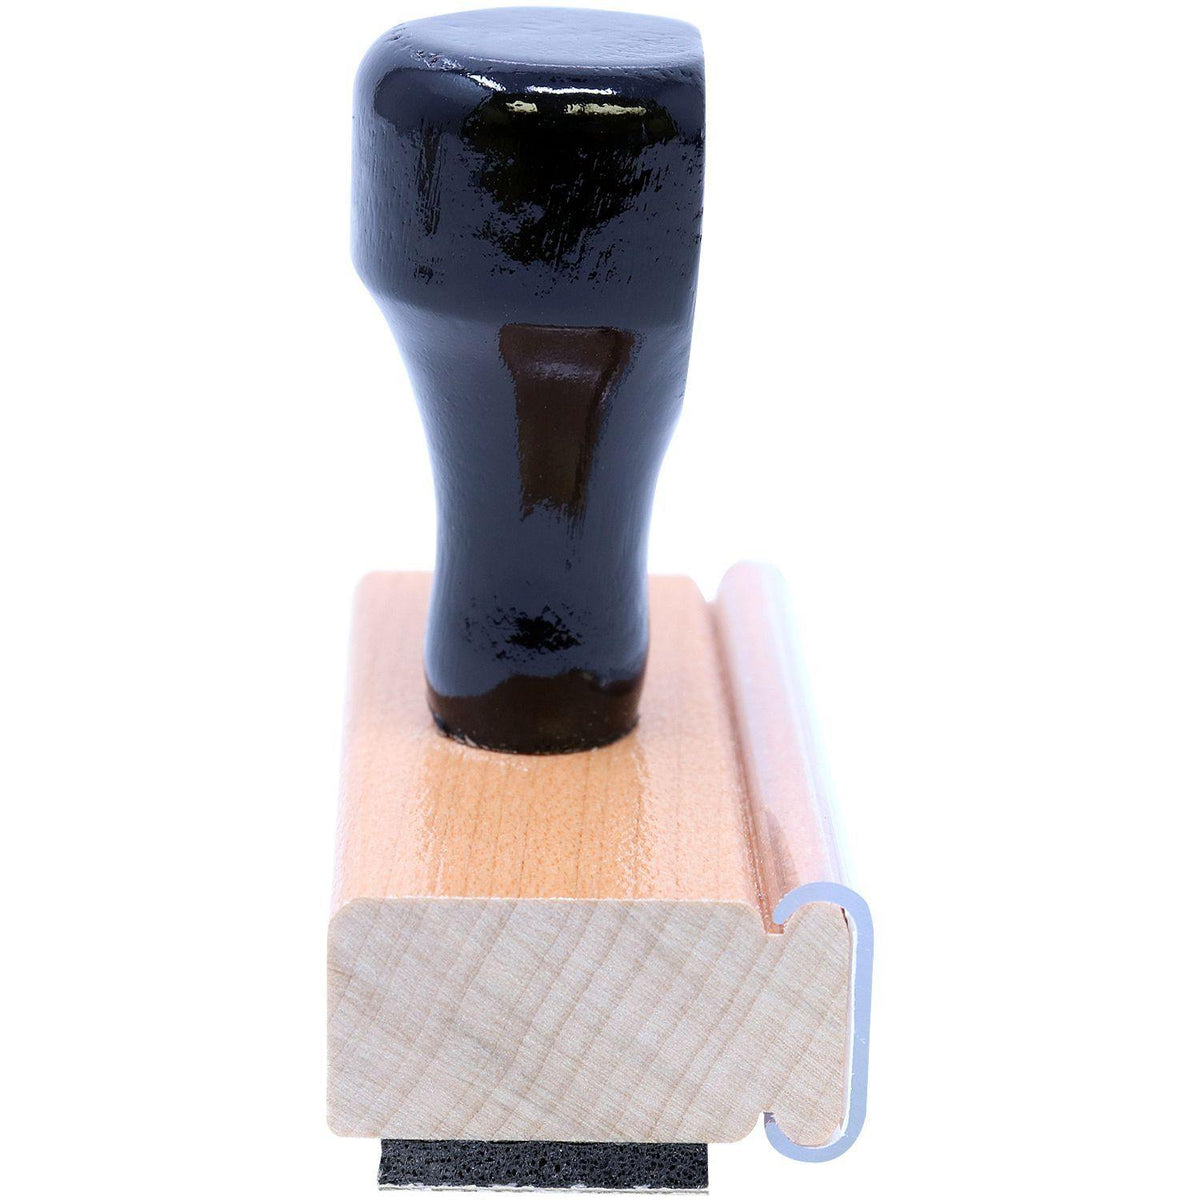 Round File Copy Rubber Stamp - Engineer Seal Stamps - Brand_Acorn, Impression Size_Small, Stamp Type_Regular Stamp, Type of Use_General, Type of Use_Office